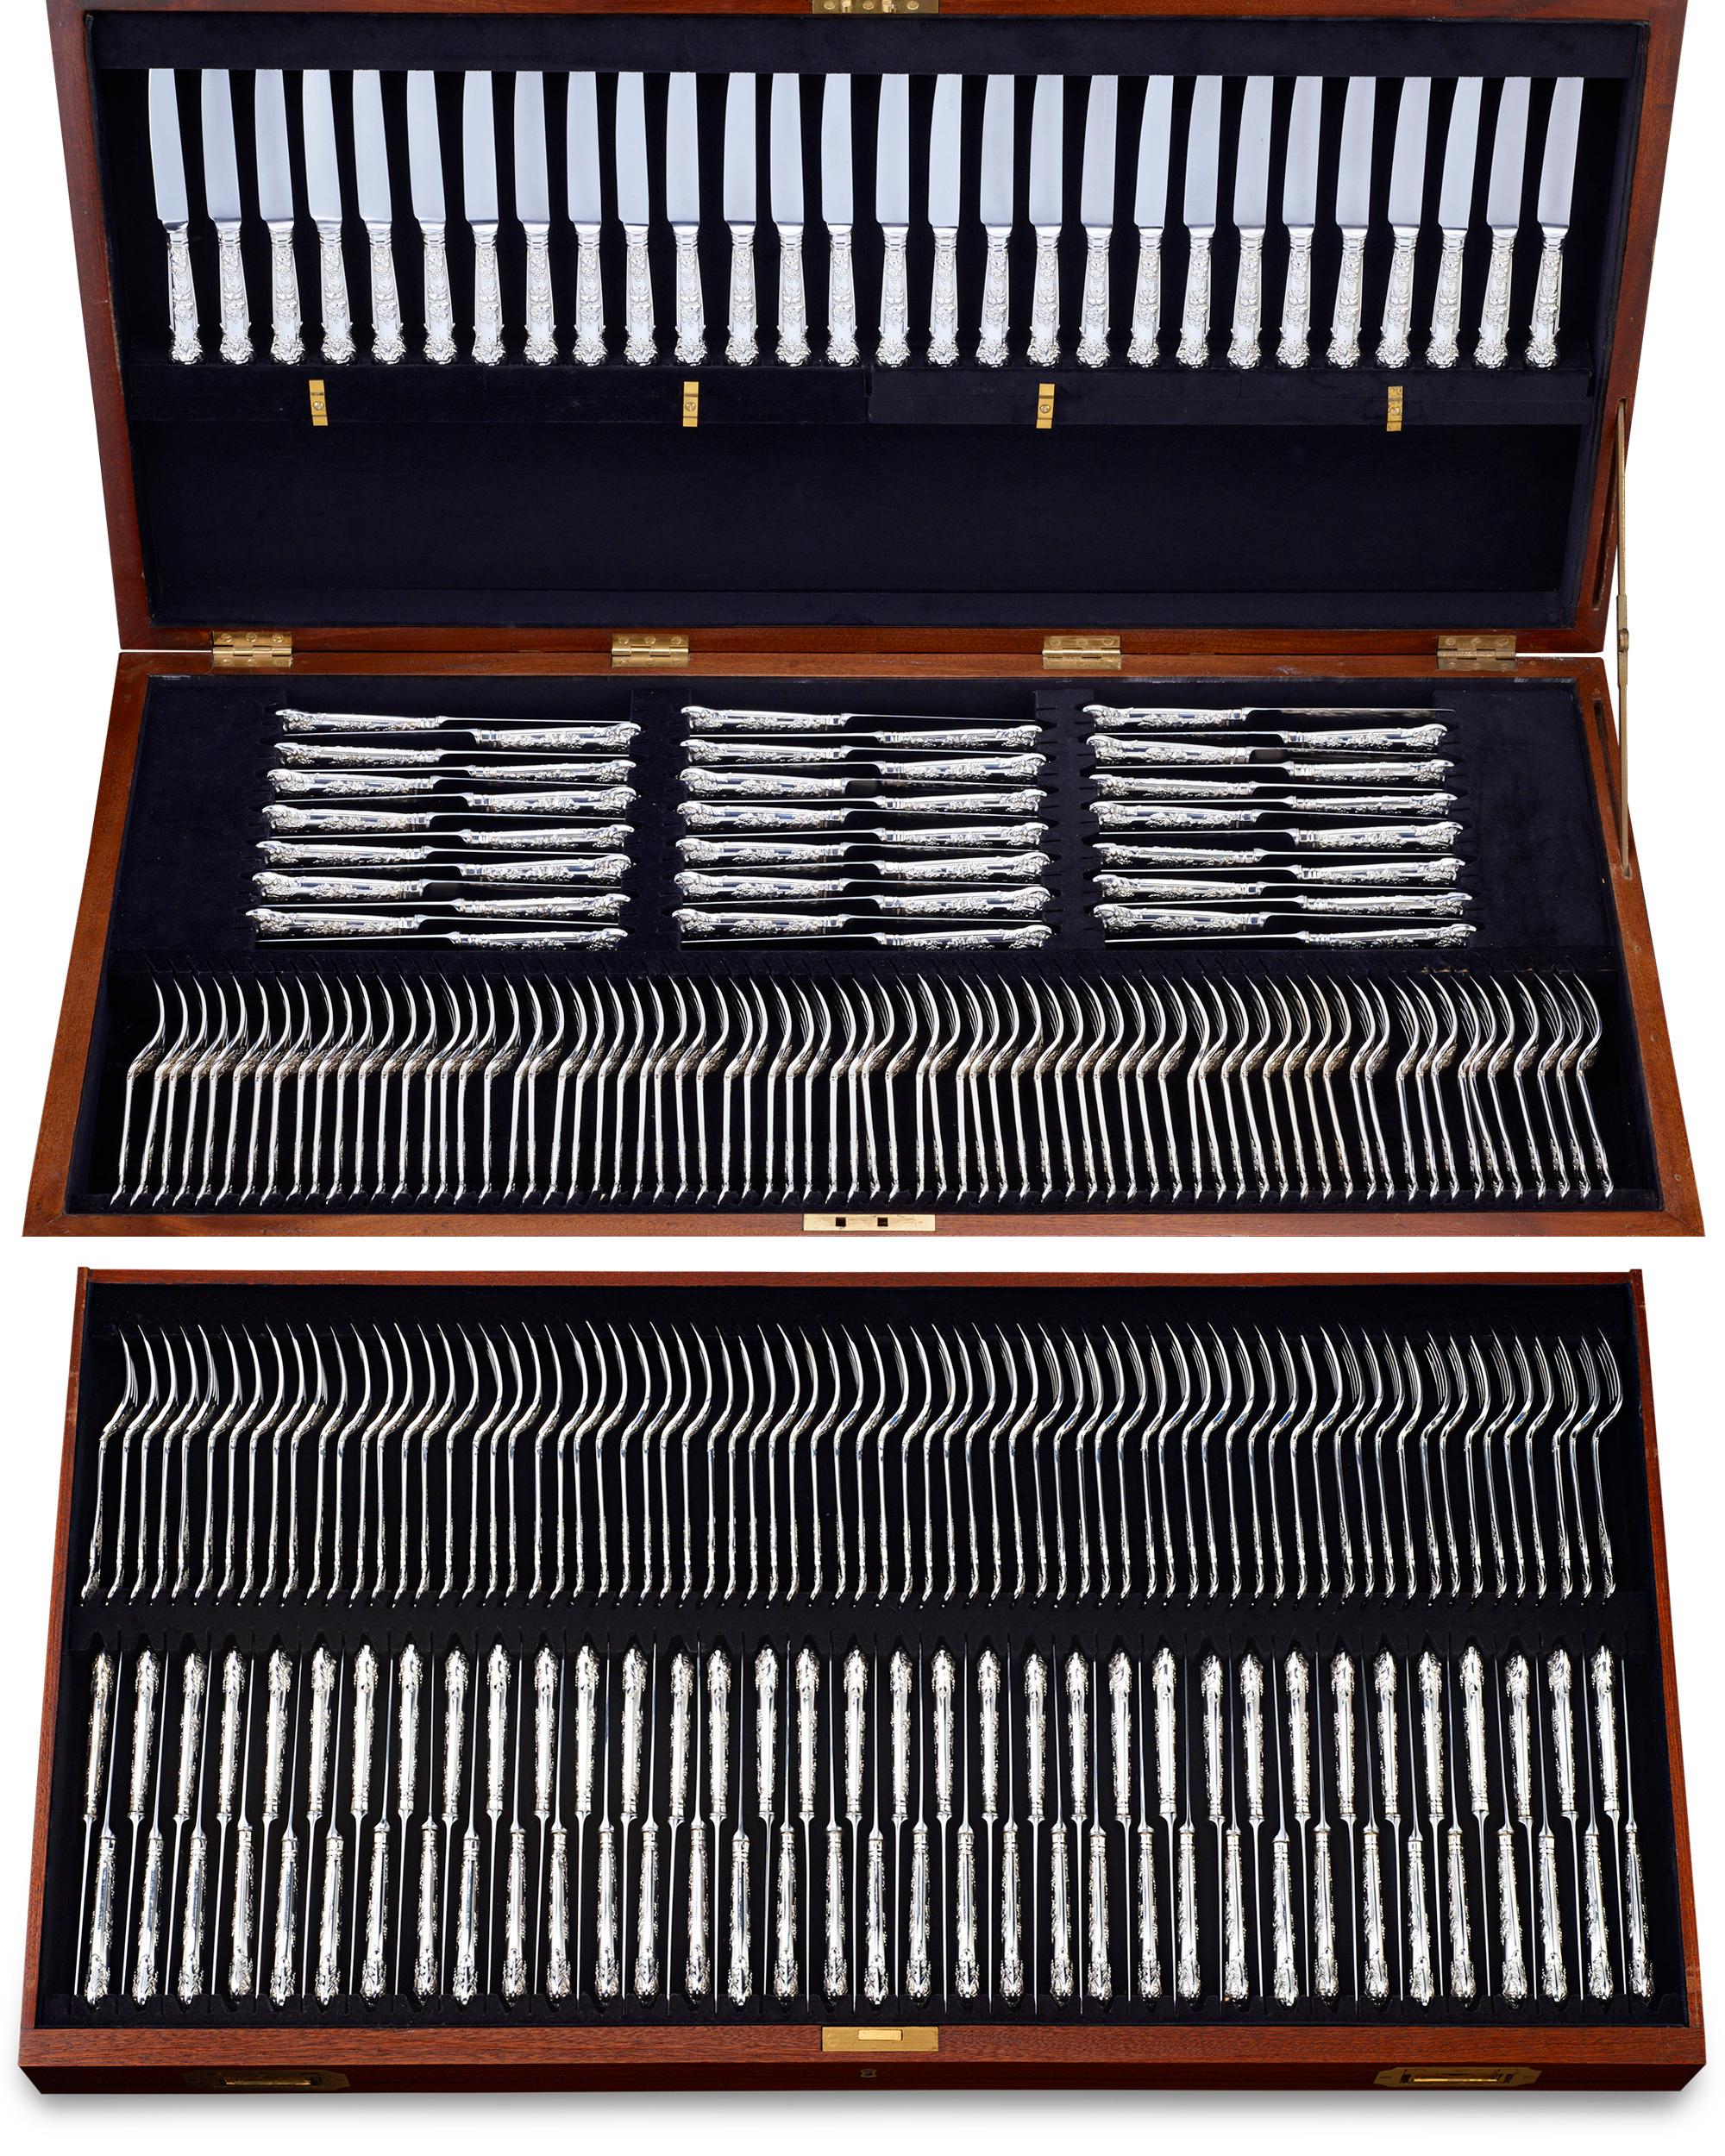 Pristine and immense in its breadth, this 994-piece silver set, created by the renowned C.J. Vander of London, is in a class of its own. When silver was the coinage of Great Britain, silver flatware sets became affirmations of economic prosperity